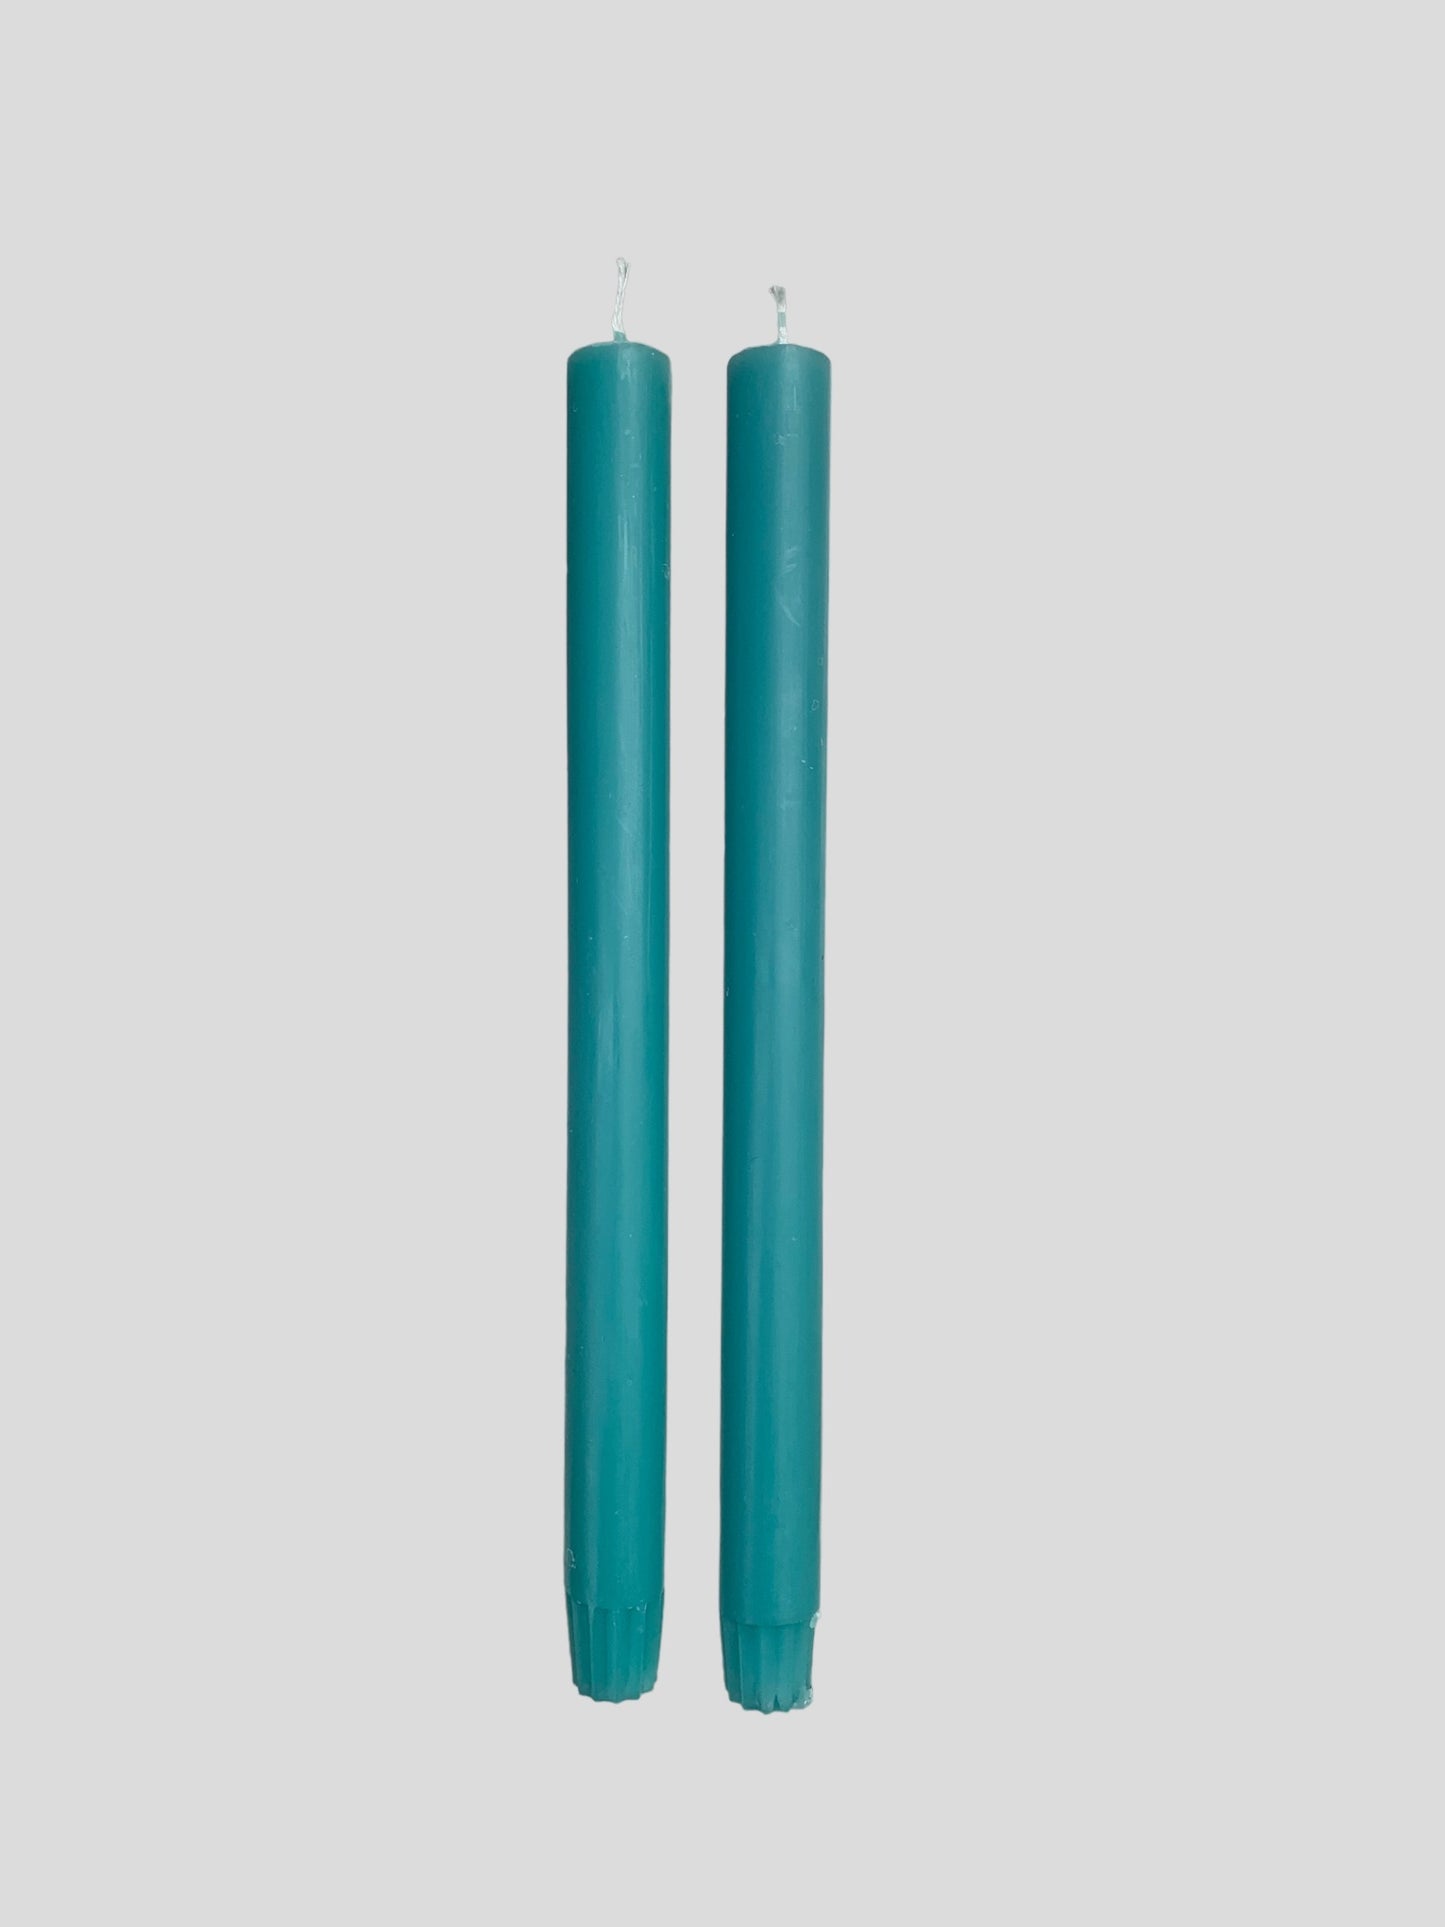 A pair of turquoise candles from True Grace